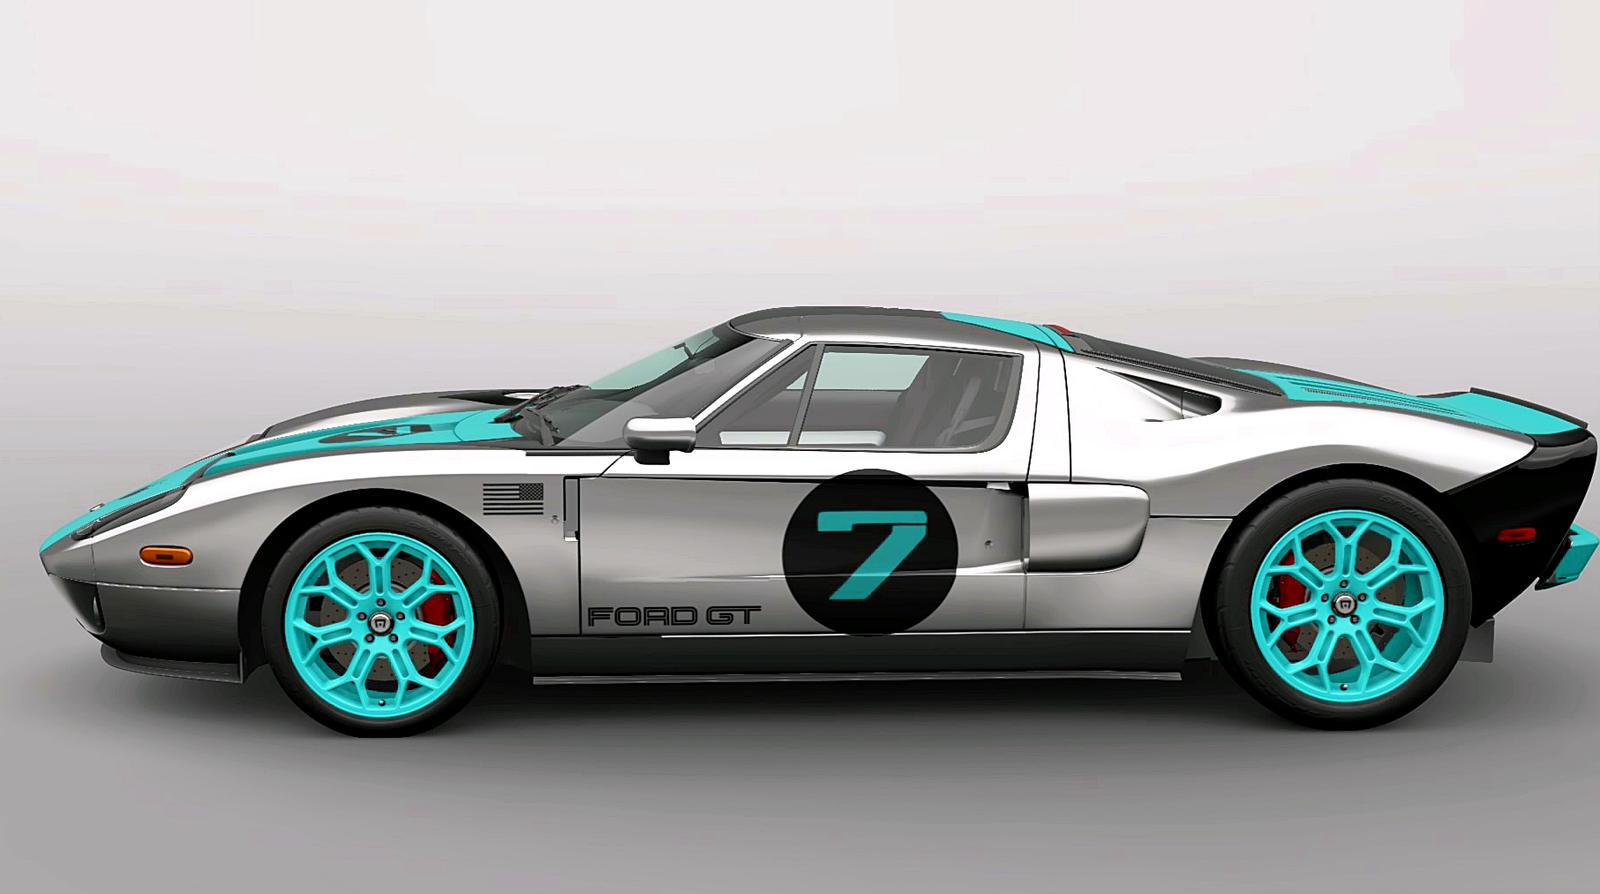 2006 Ford GT (Gran Turismo 5) by Vertualissimo on DeviantArt